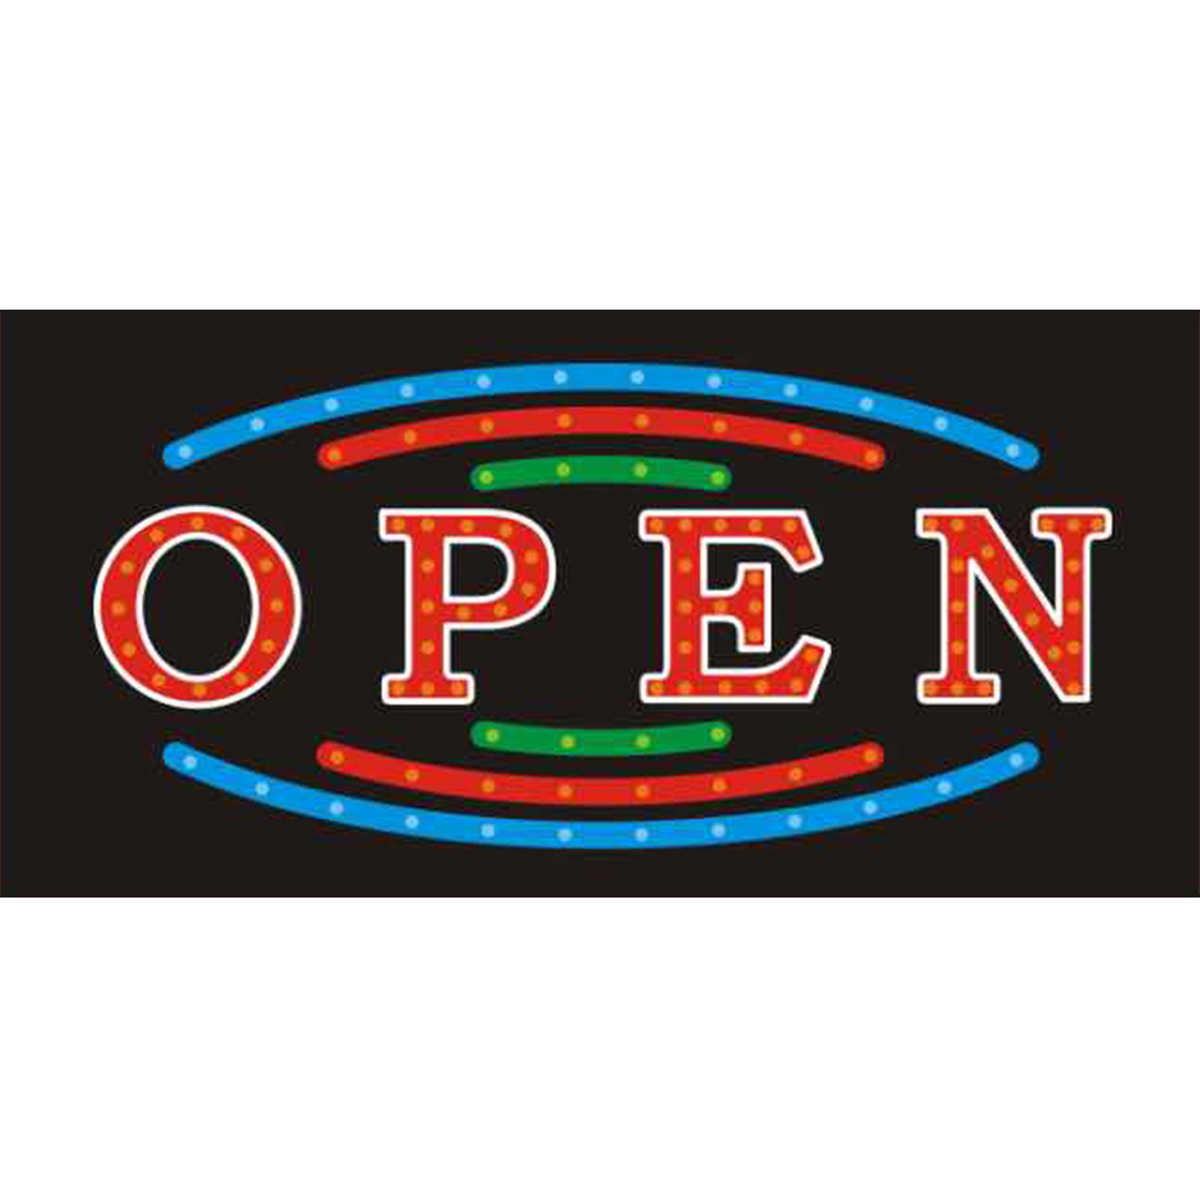 Open light signs from Nano